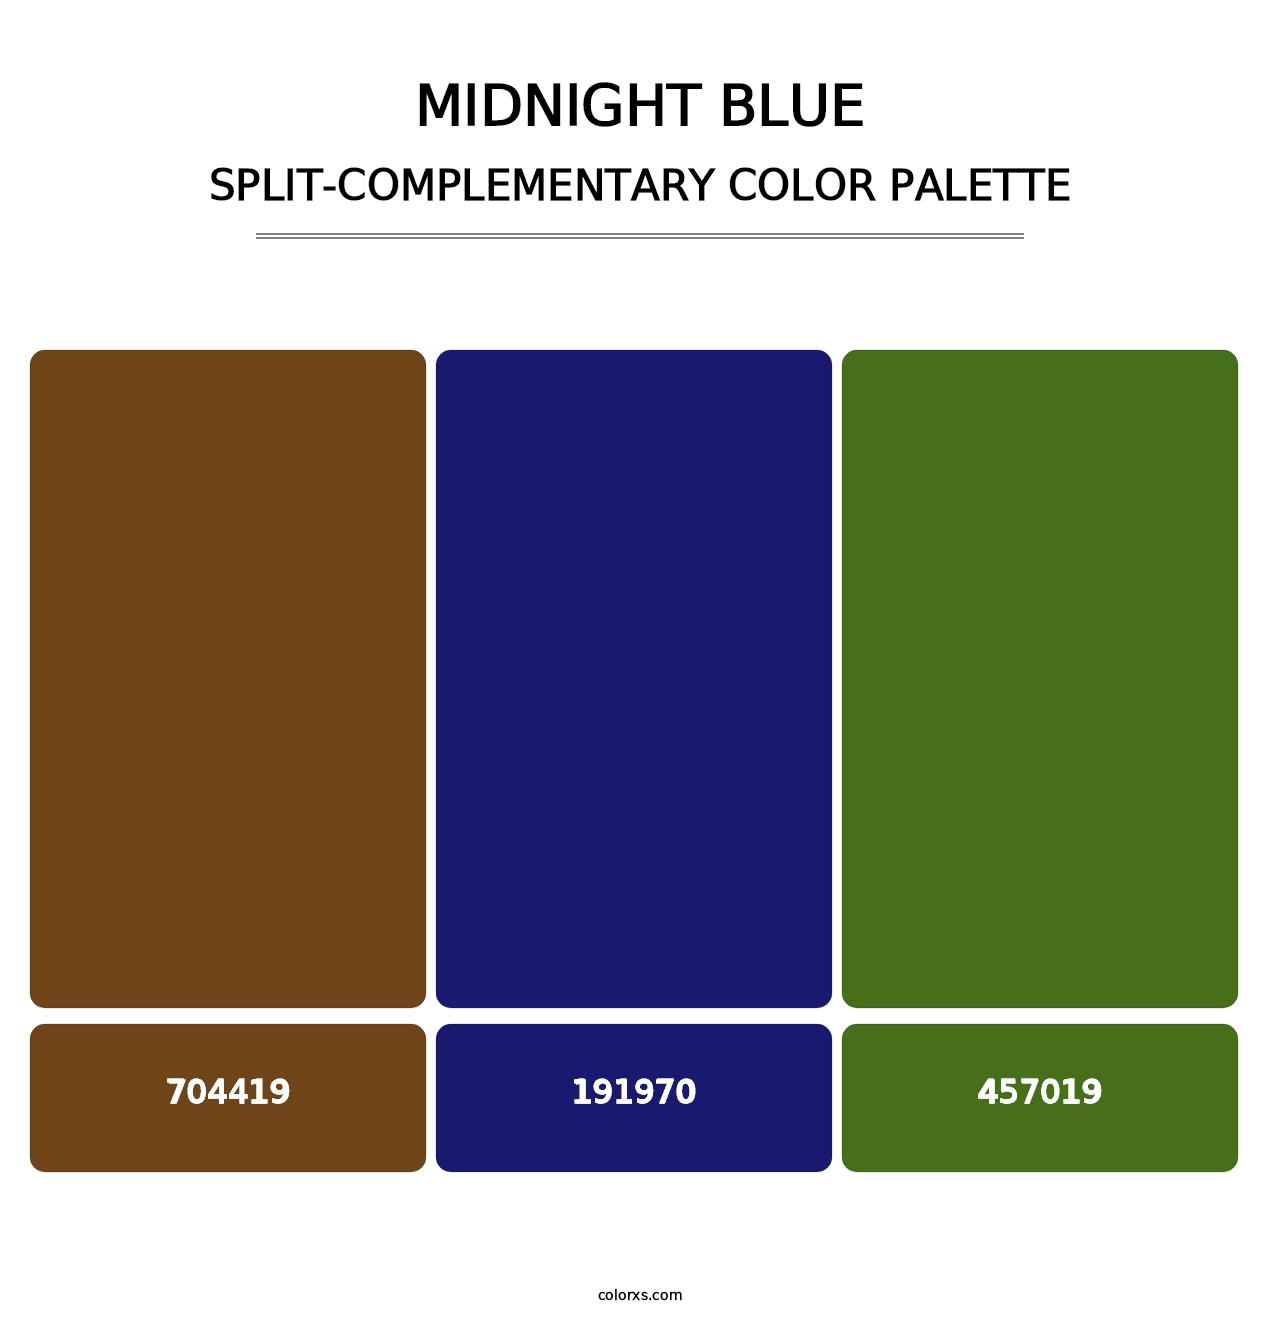 Midnight Blue - Split-Complementary Color Palette